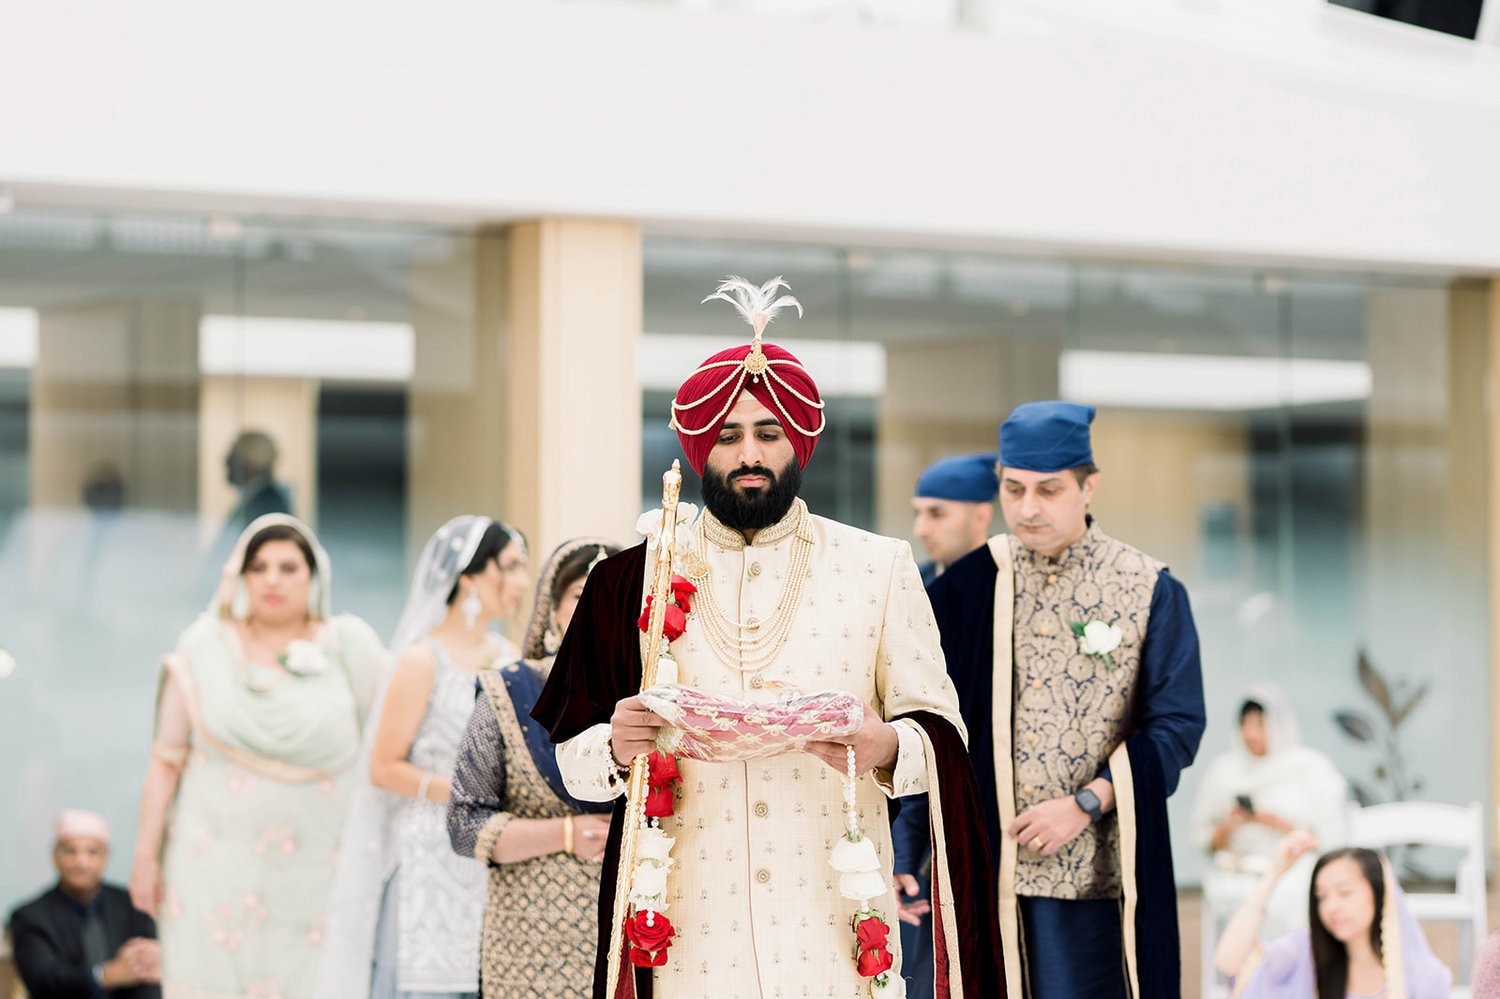 A South asian groom in a red turban and cream coloured coat is escorted in the temple for his wedding